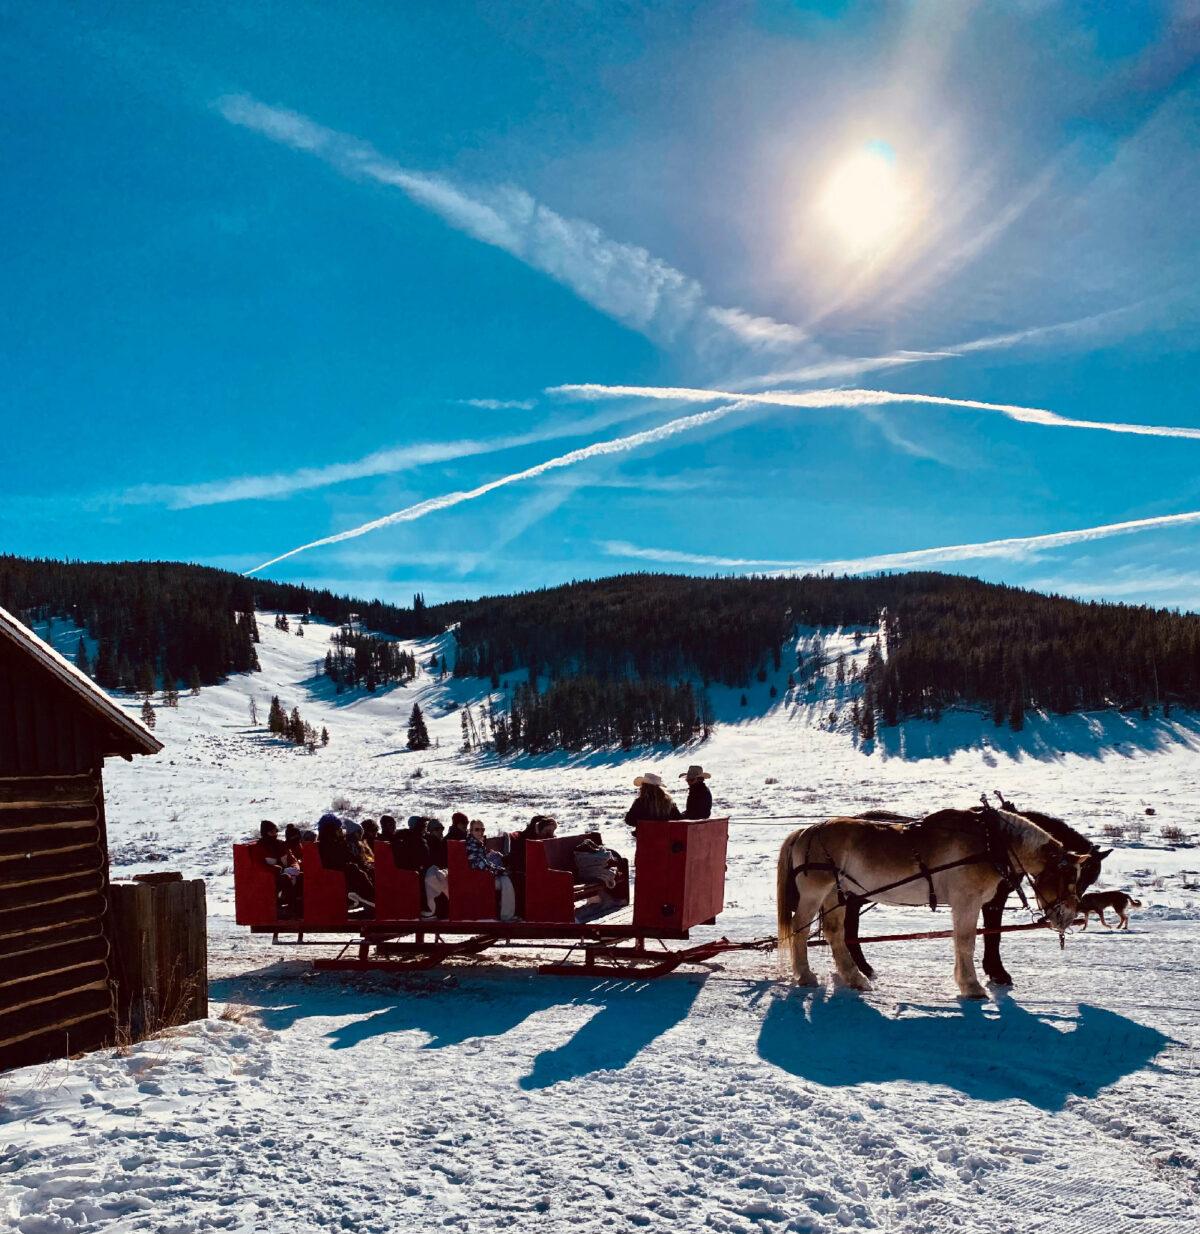 Visitors to Keystone, Colo., have the option of enjoying a sleigh ride through the snow. (Margot Black)